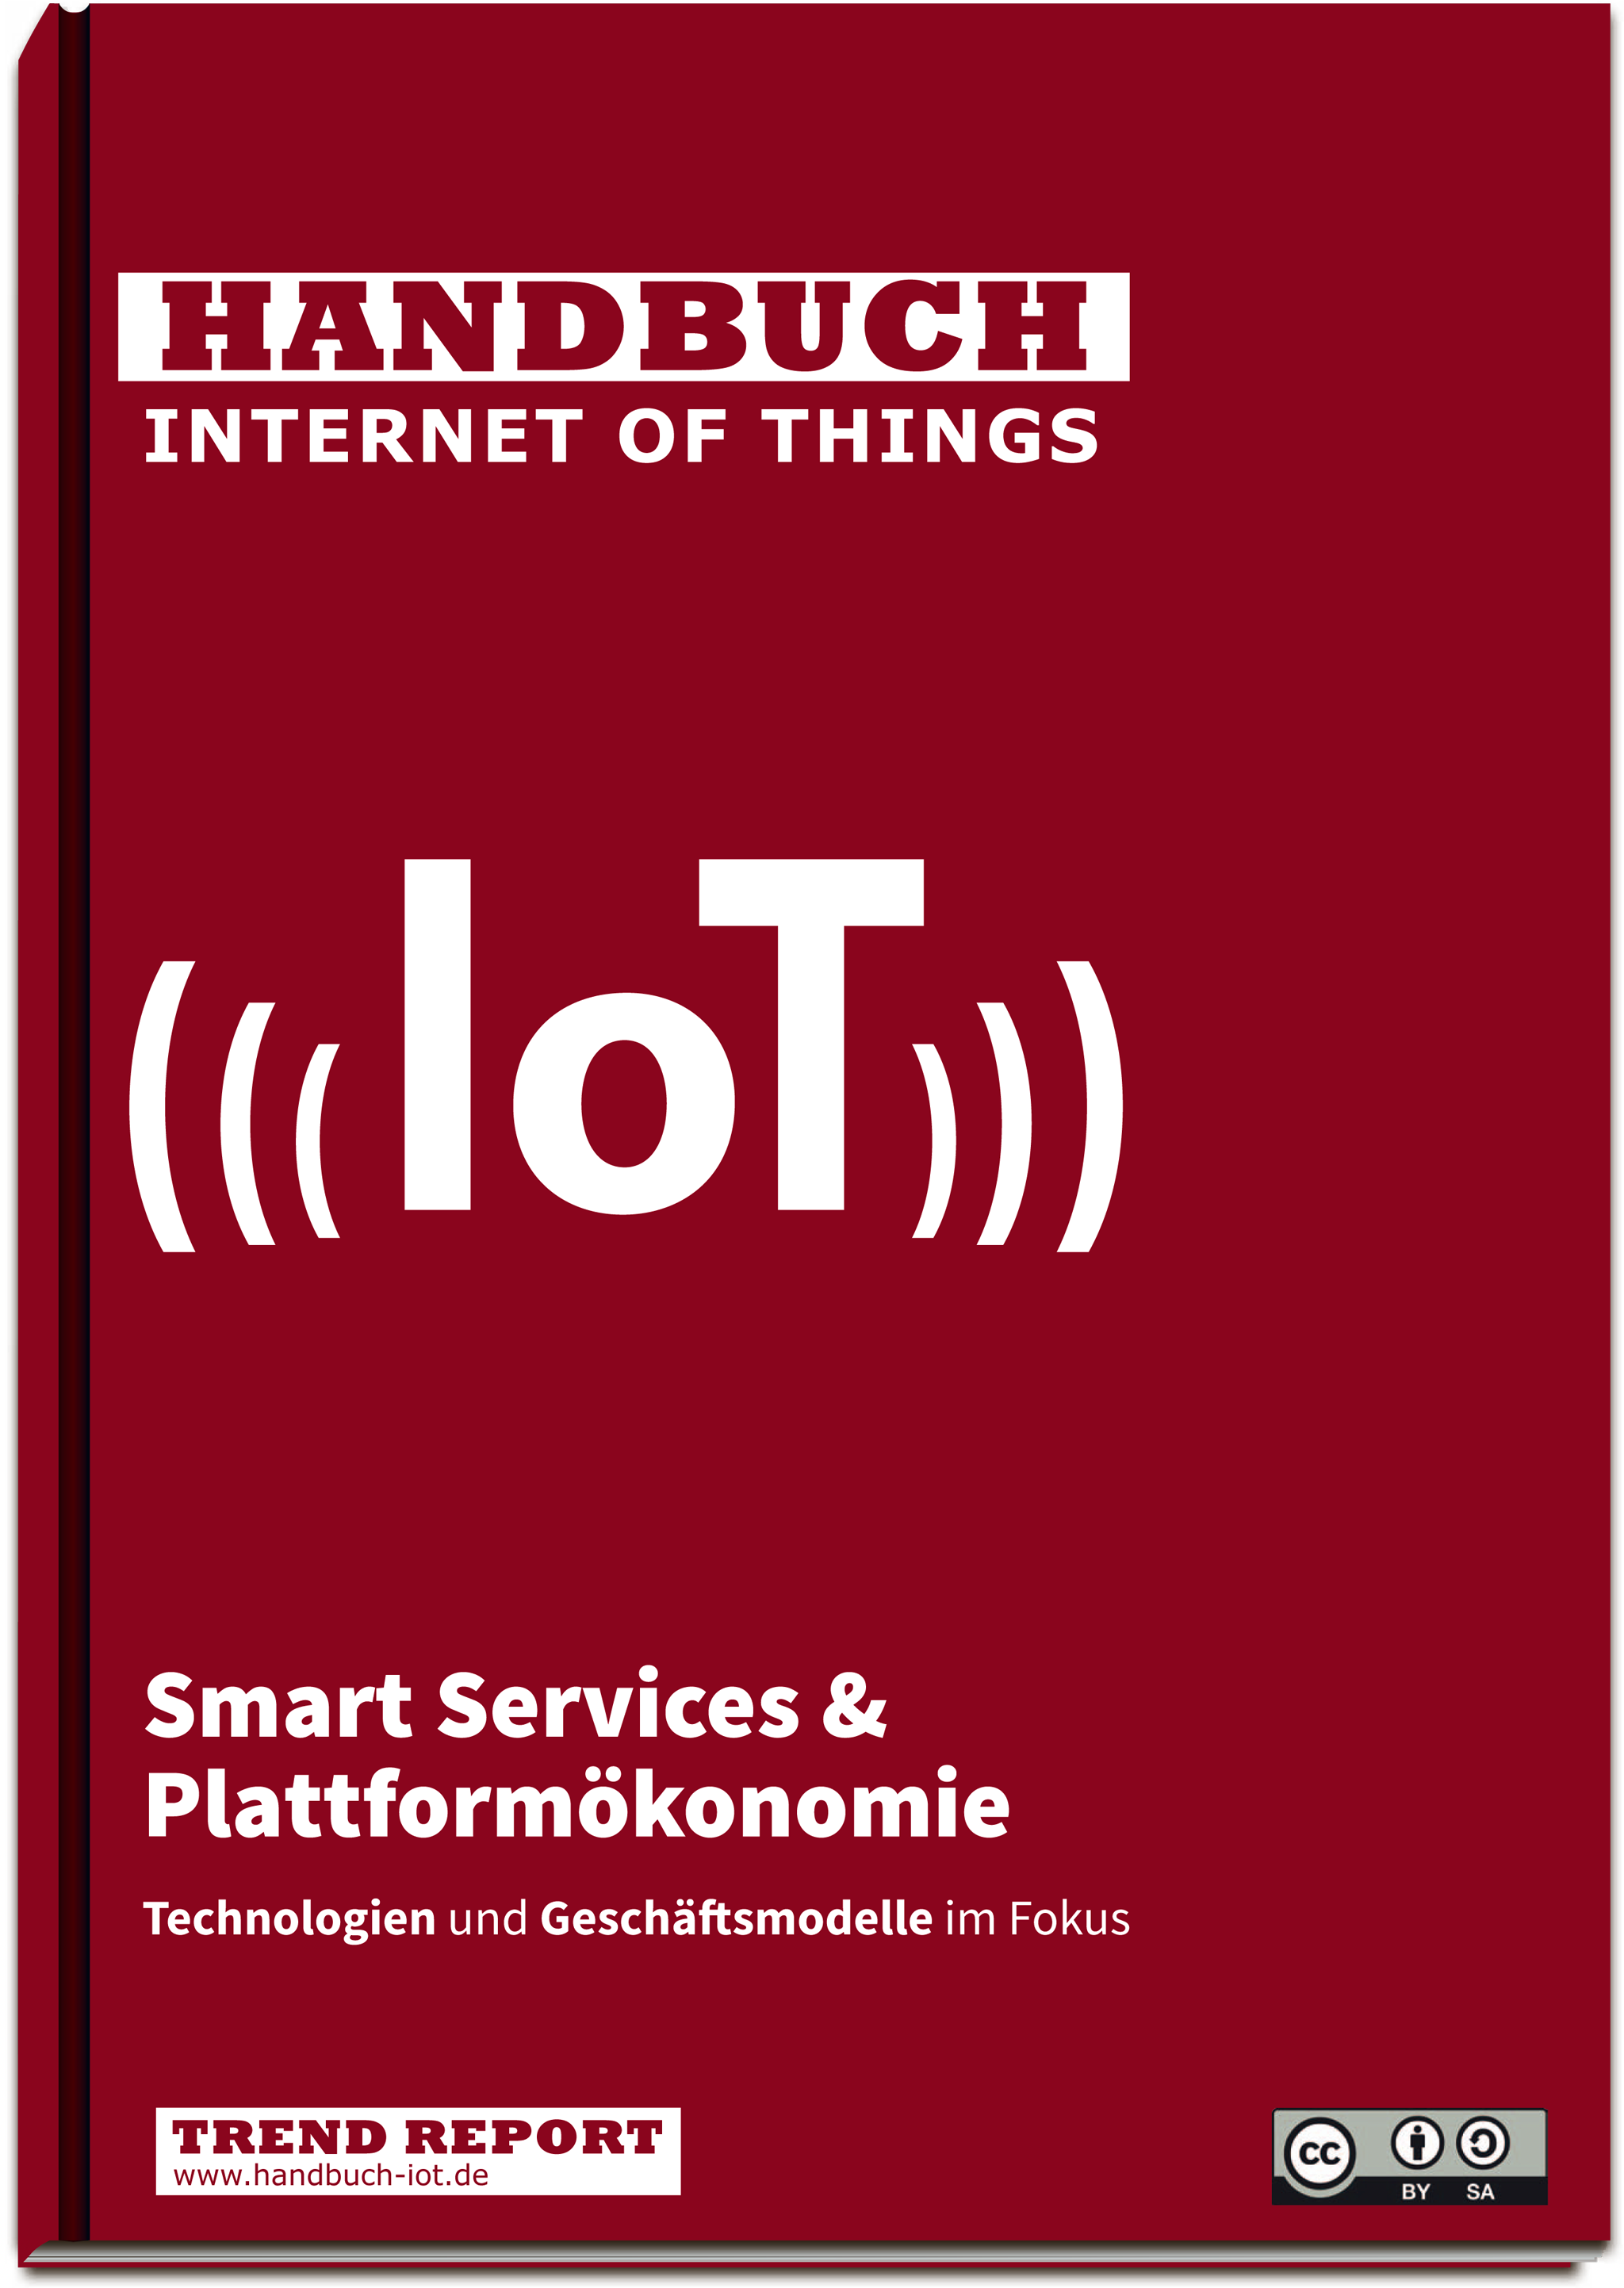 Cover Internet of Things